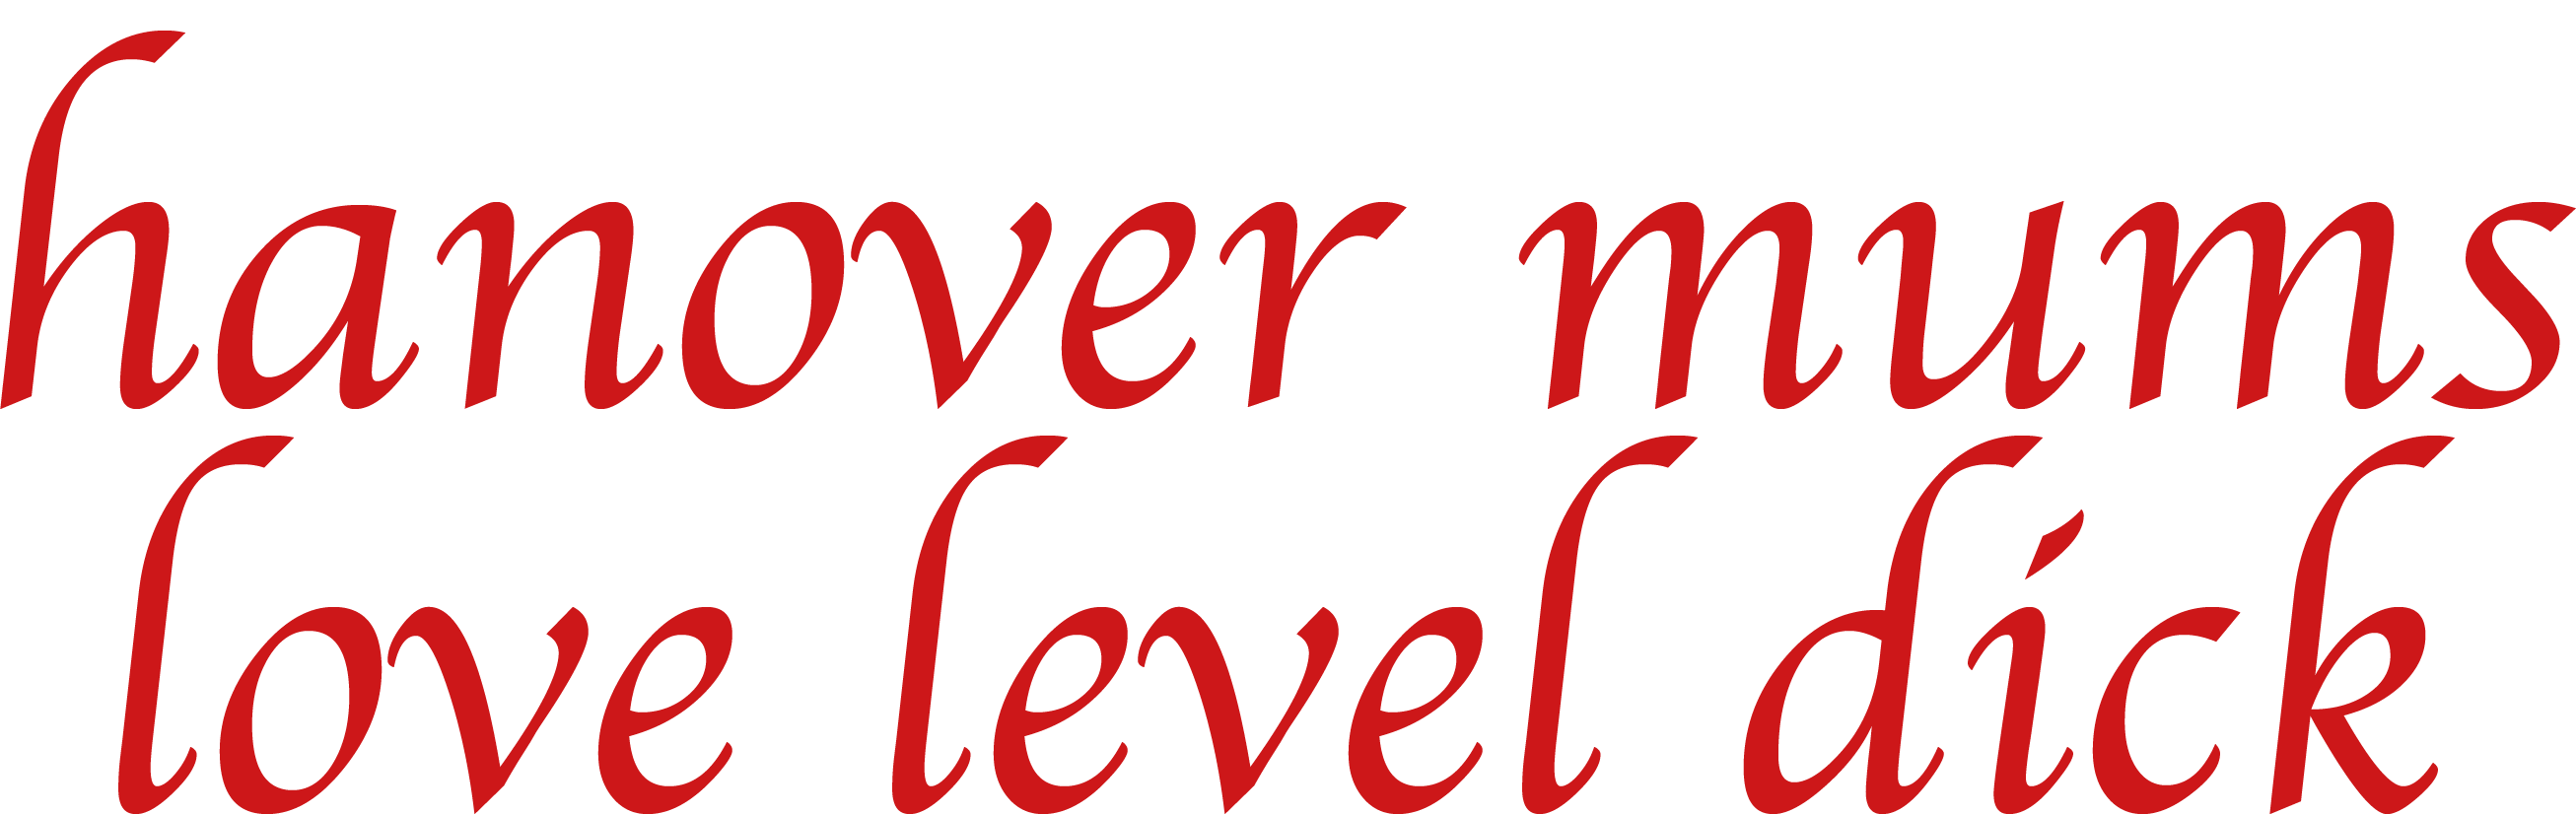 a graphic of text on the white background, saying “hanover mums love level dick” in red Chancery all-lower-case letters.